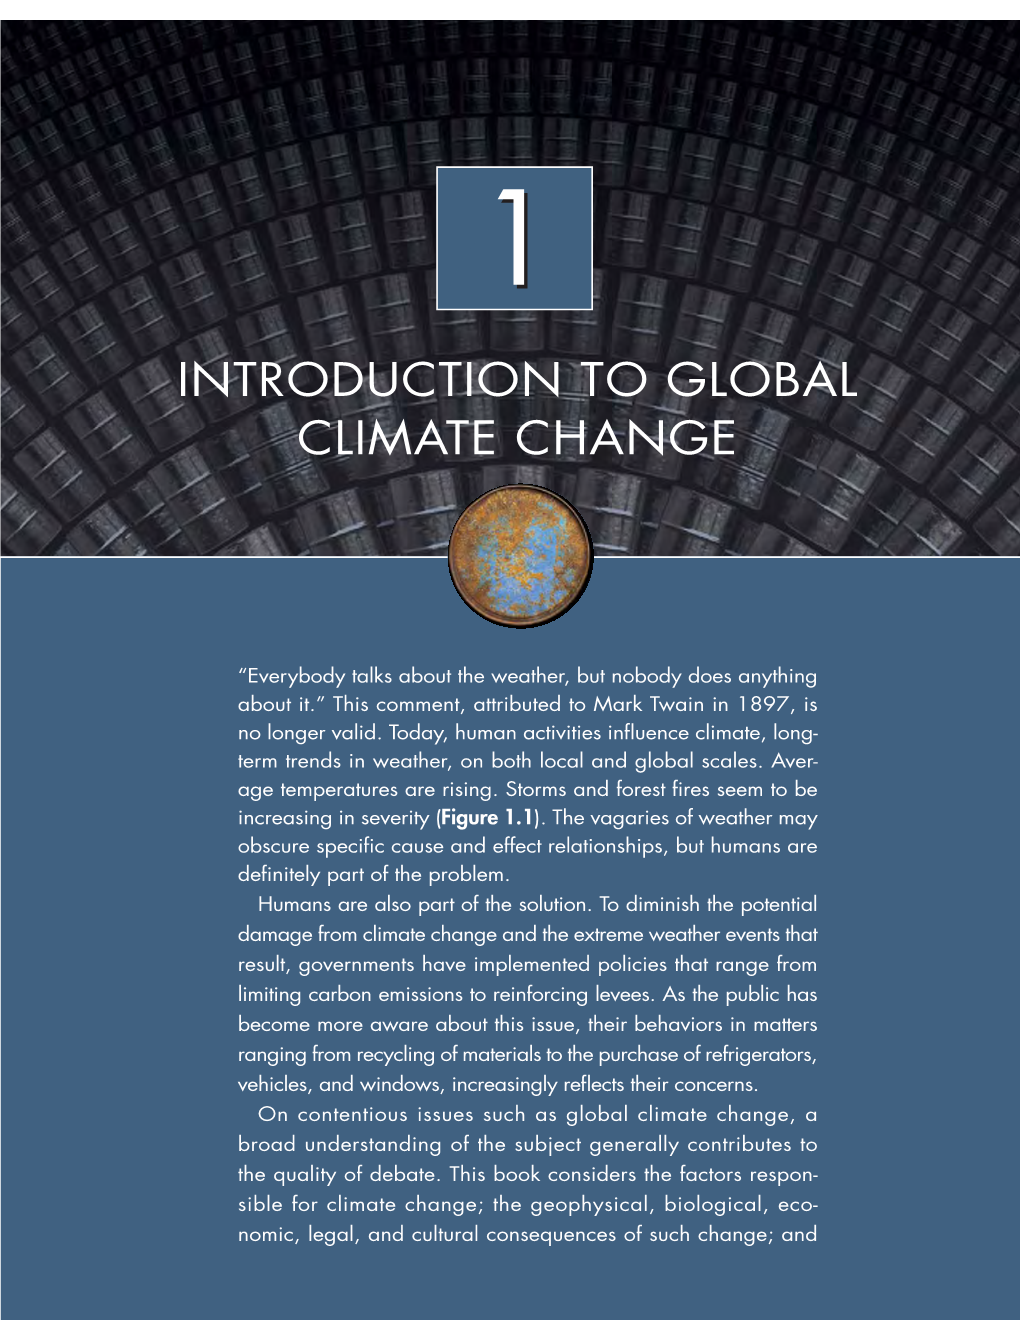 Introduction to Global Climate Change